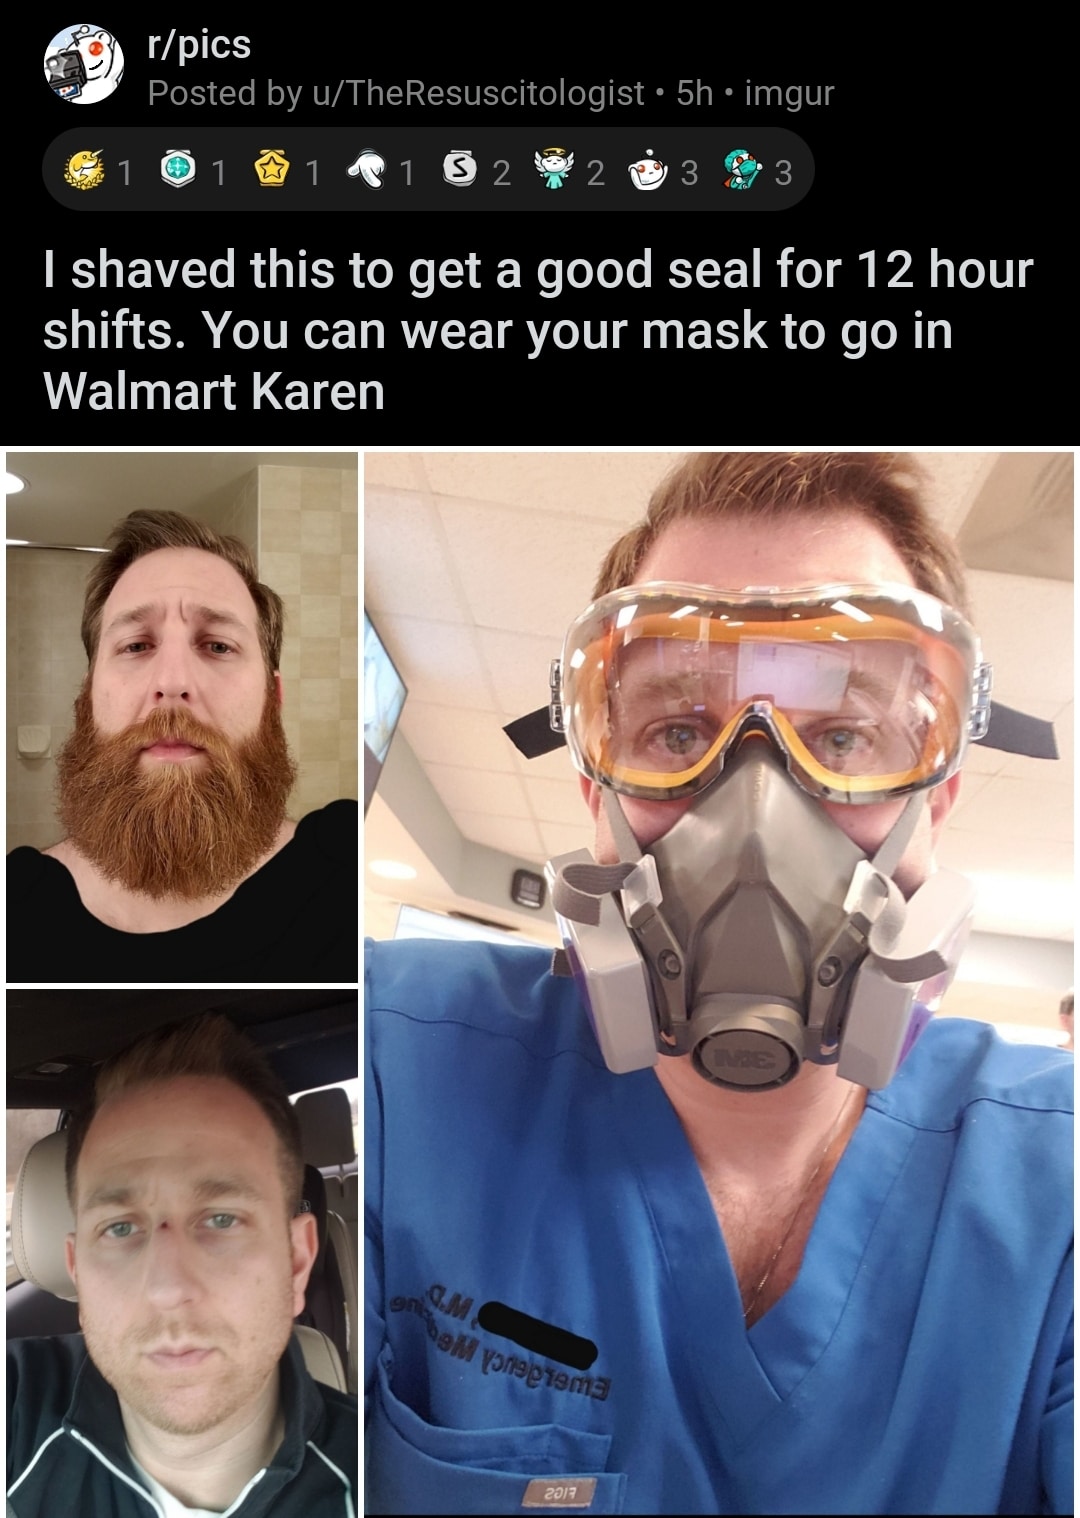 History, Hitler History Memes History, Hitler text: r/pics Posted by u/TheResuscitologist • 5h • imgur I shaved this to get a good seal for 12 hour shifts. You can wear your mask to go in Walmart Karen 